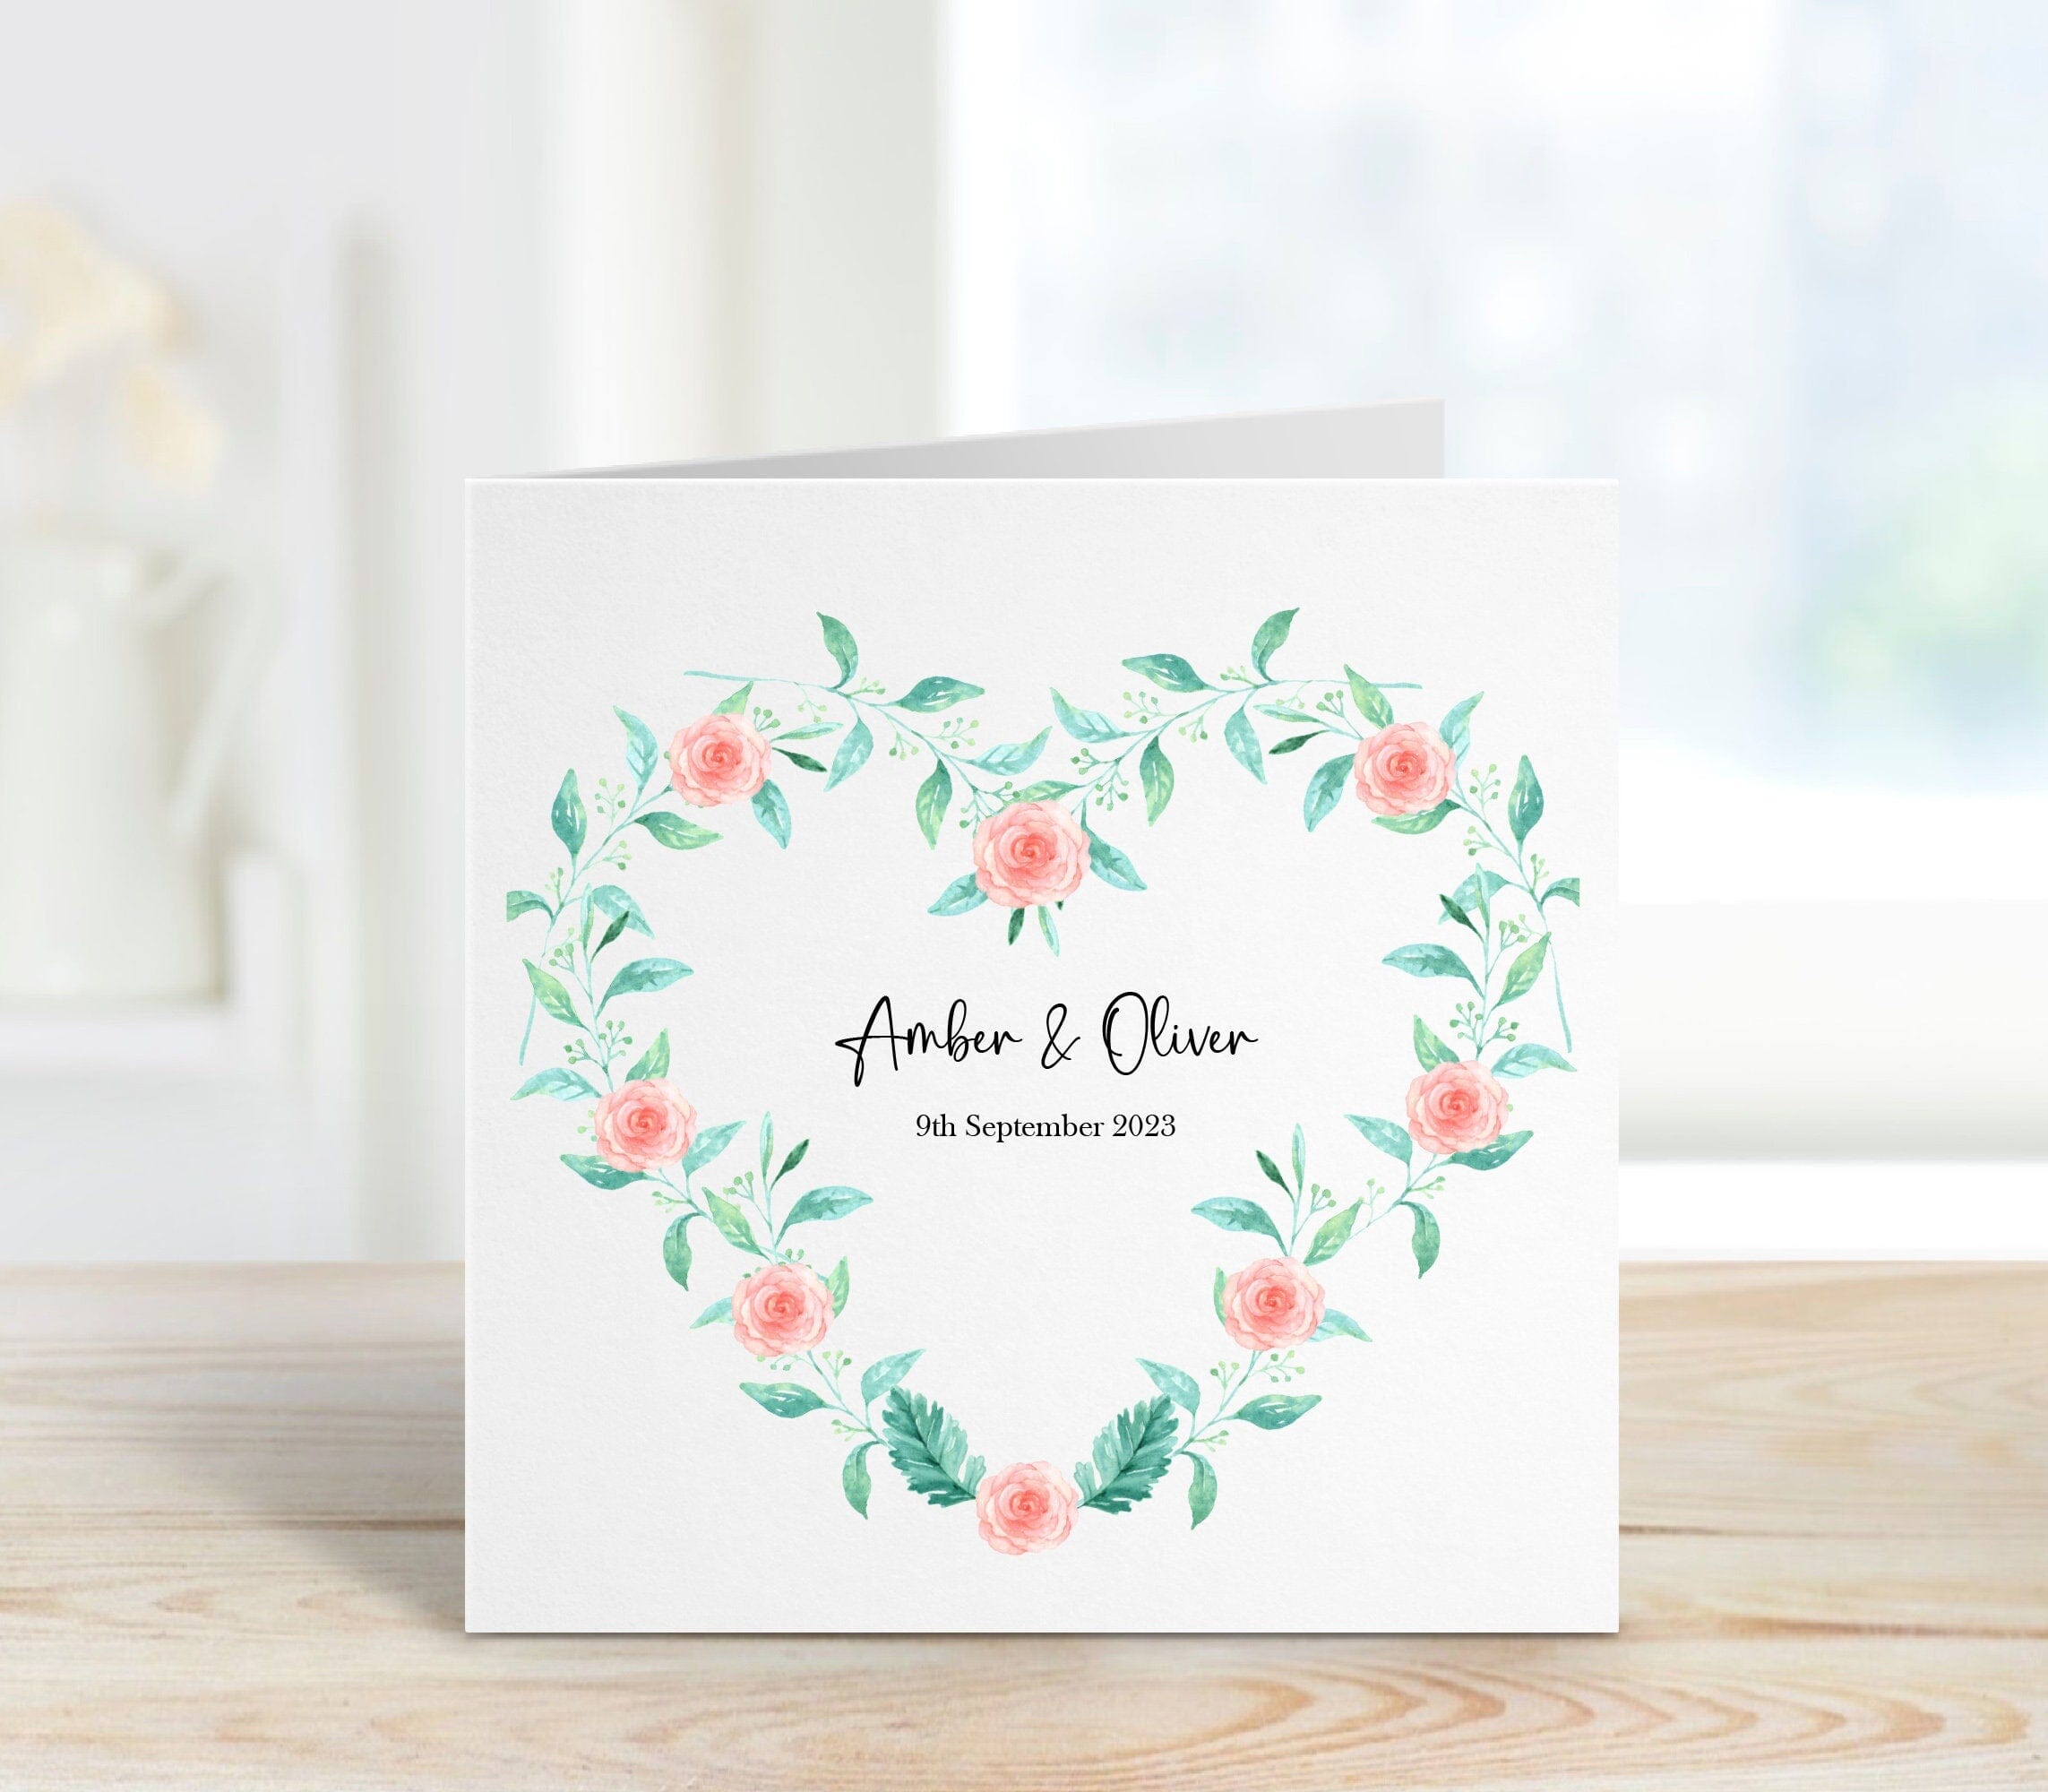 Personalised Floral Wedding Card, On Your Wedding Day Congratulations, Mr & Mrs Keepsake Gift Card